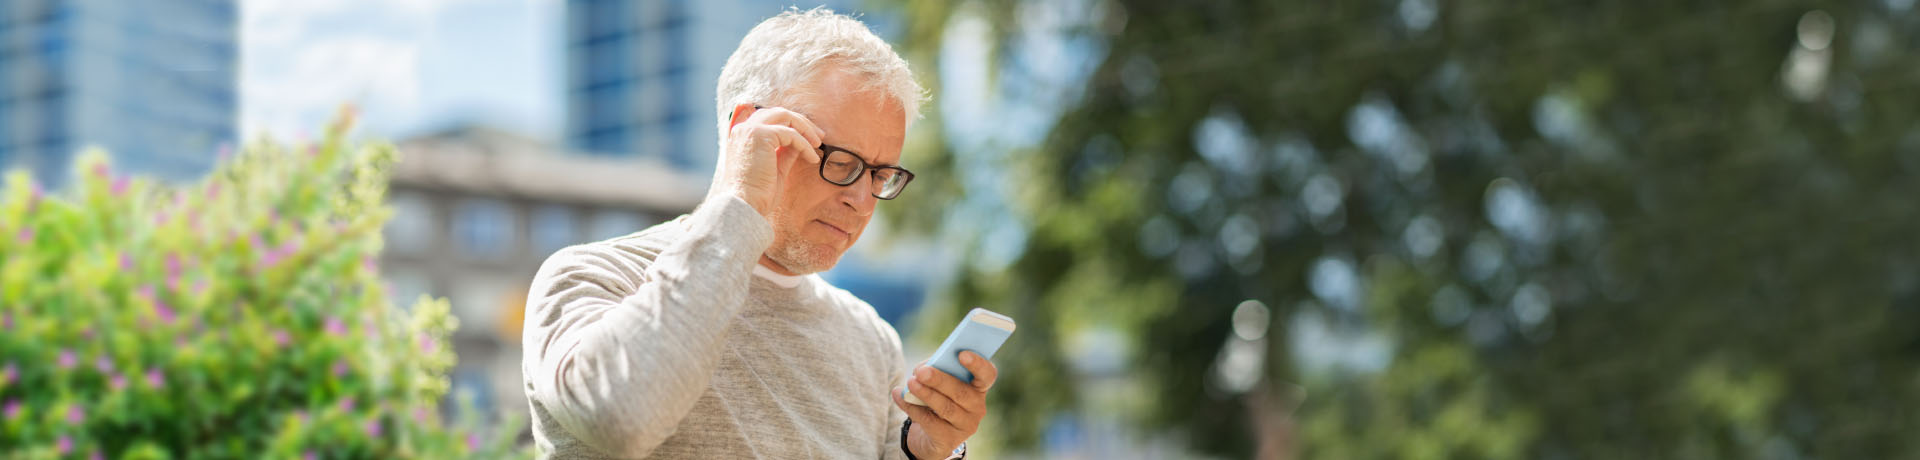 Man in a beige shirt and glasses looking at a mobile phone